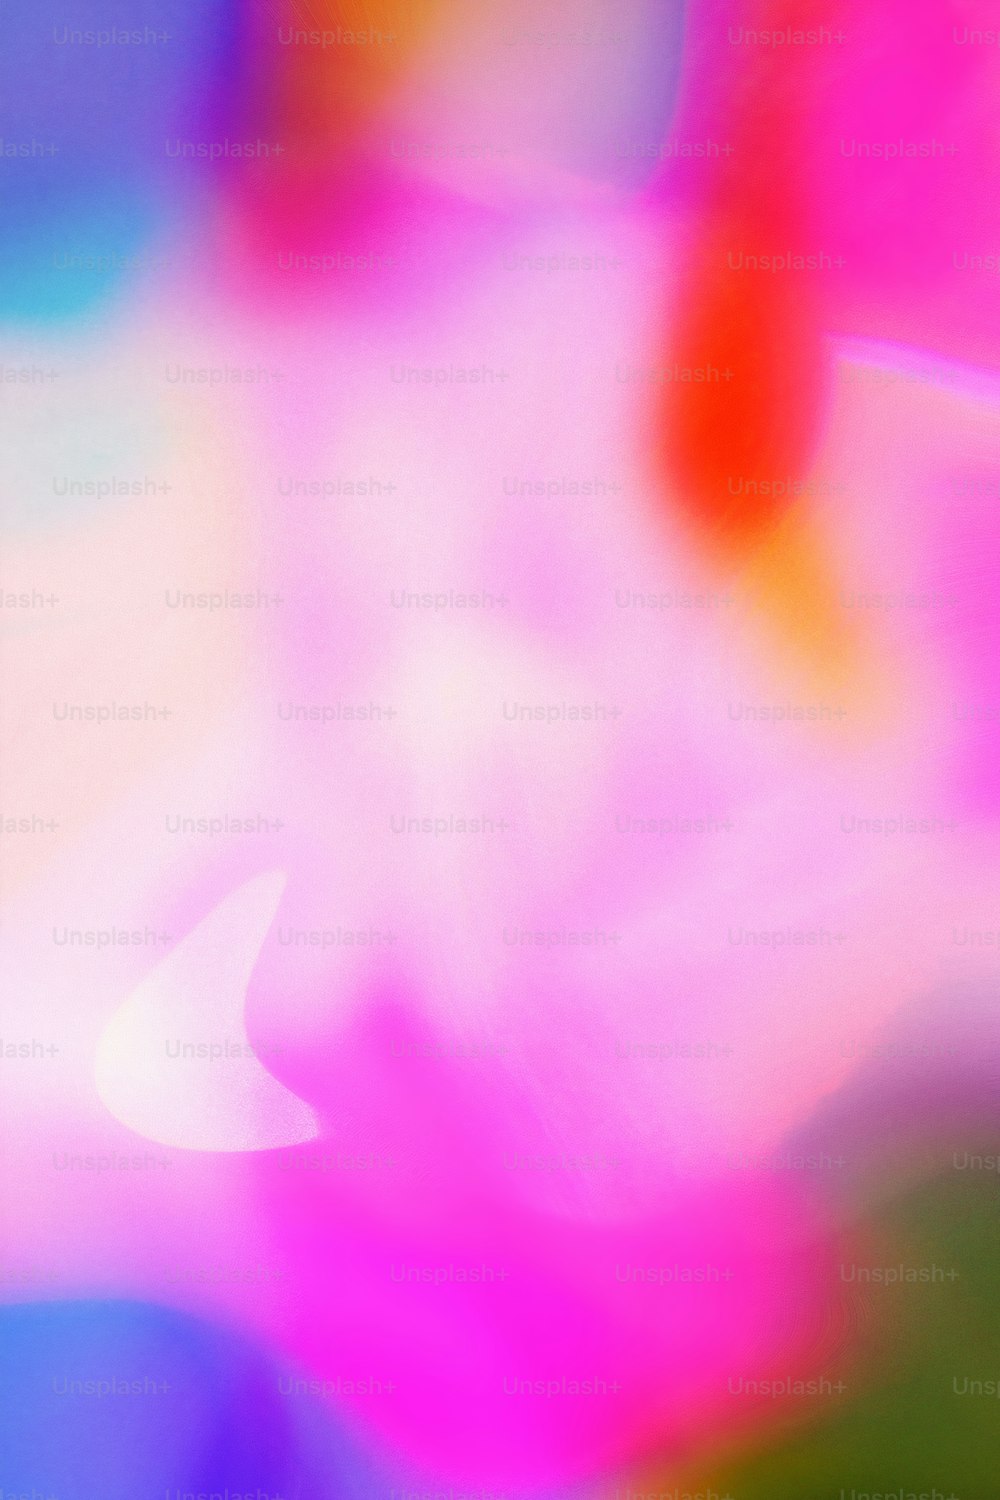 a blurry image of a pink flower with a blue background